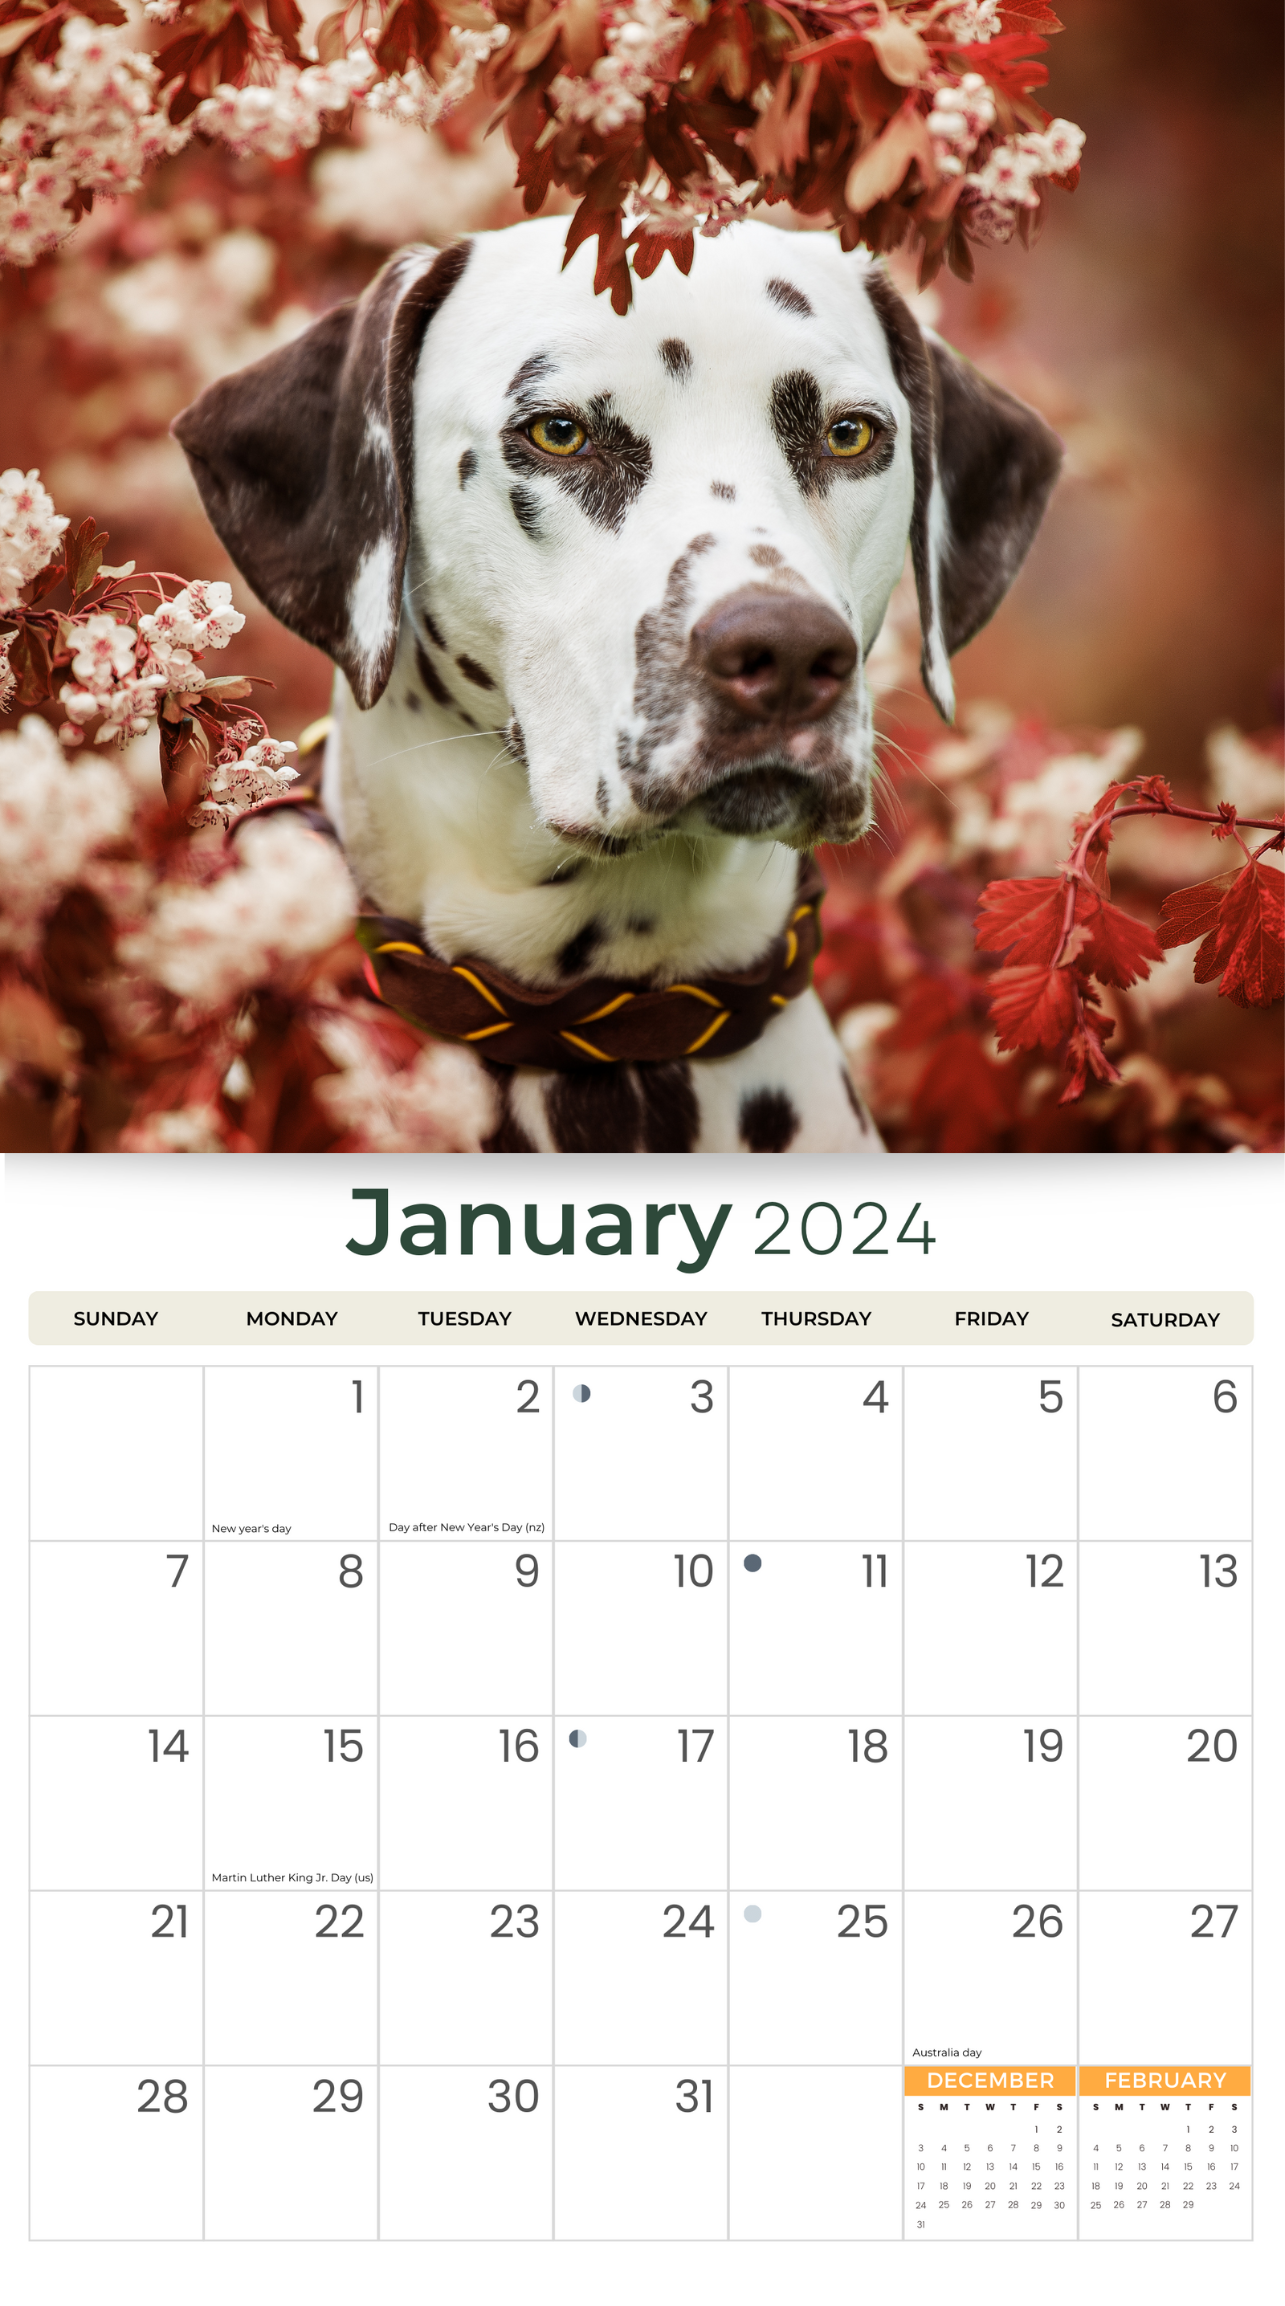 2024 Dalmatians Dogs & Puppies - Deluxe Wall Calendar by Just Calendars - 16 Month - Plastic Free